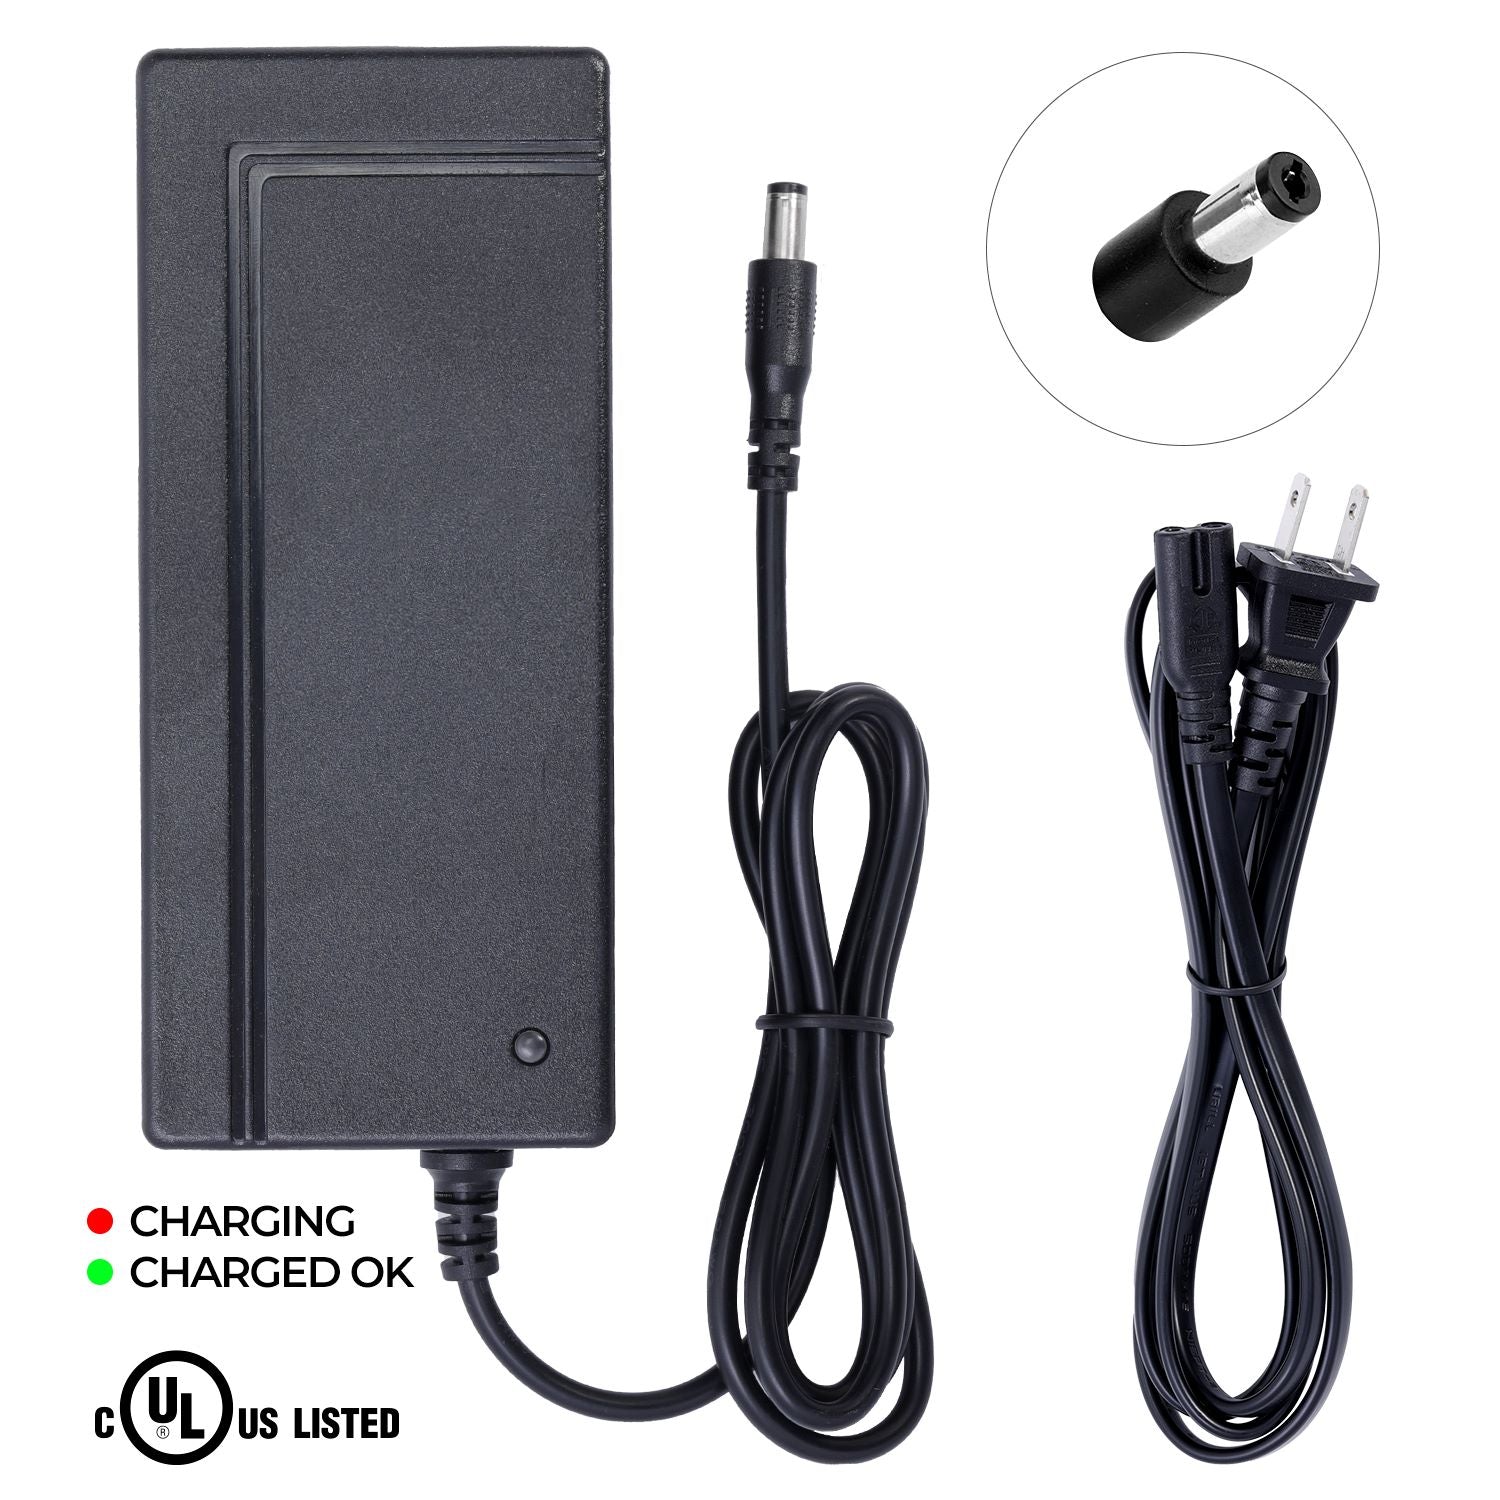 UL Certified Charger for AVENTON SOLTERA Electric Bike (If your AVENTON model is something else, do NOT order it)